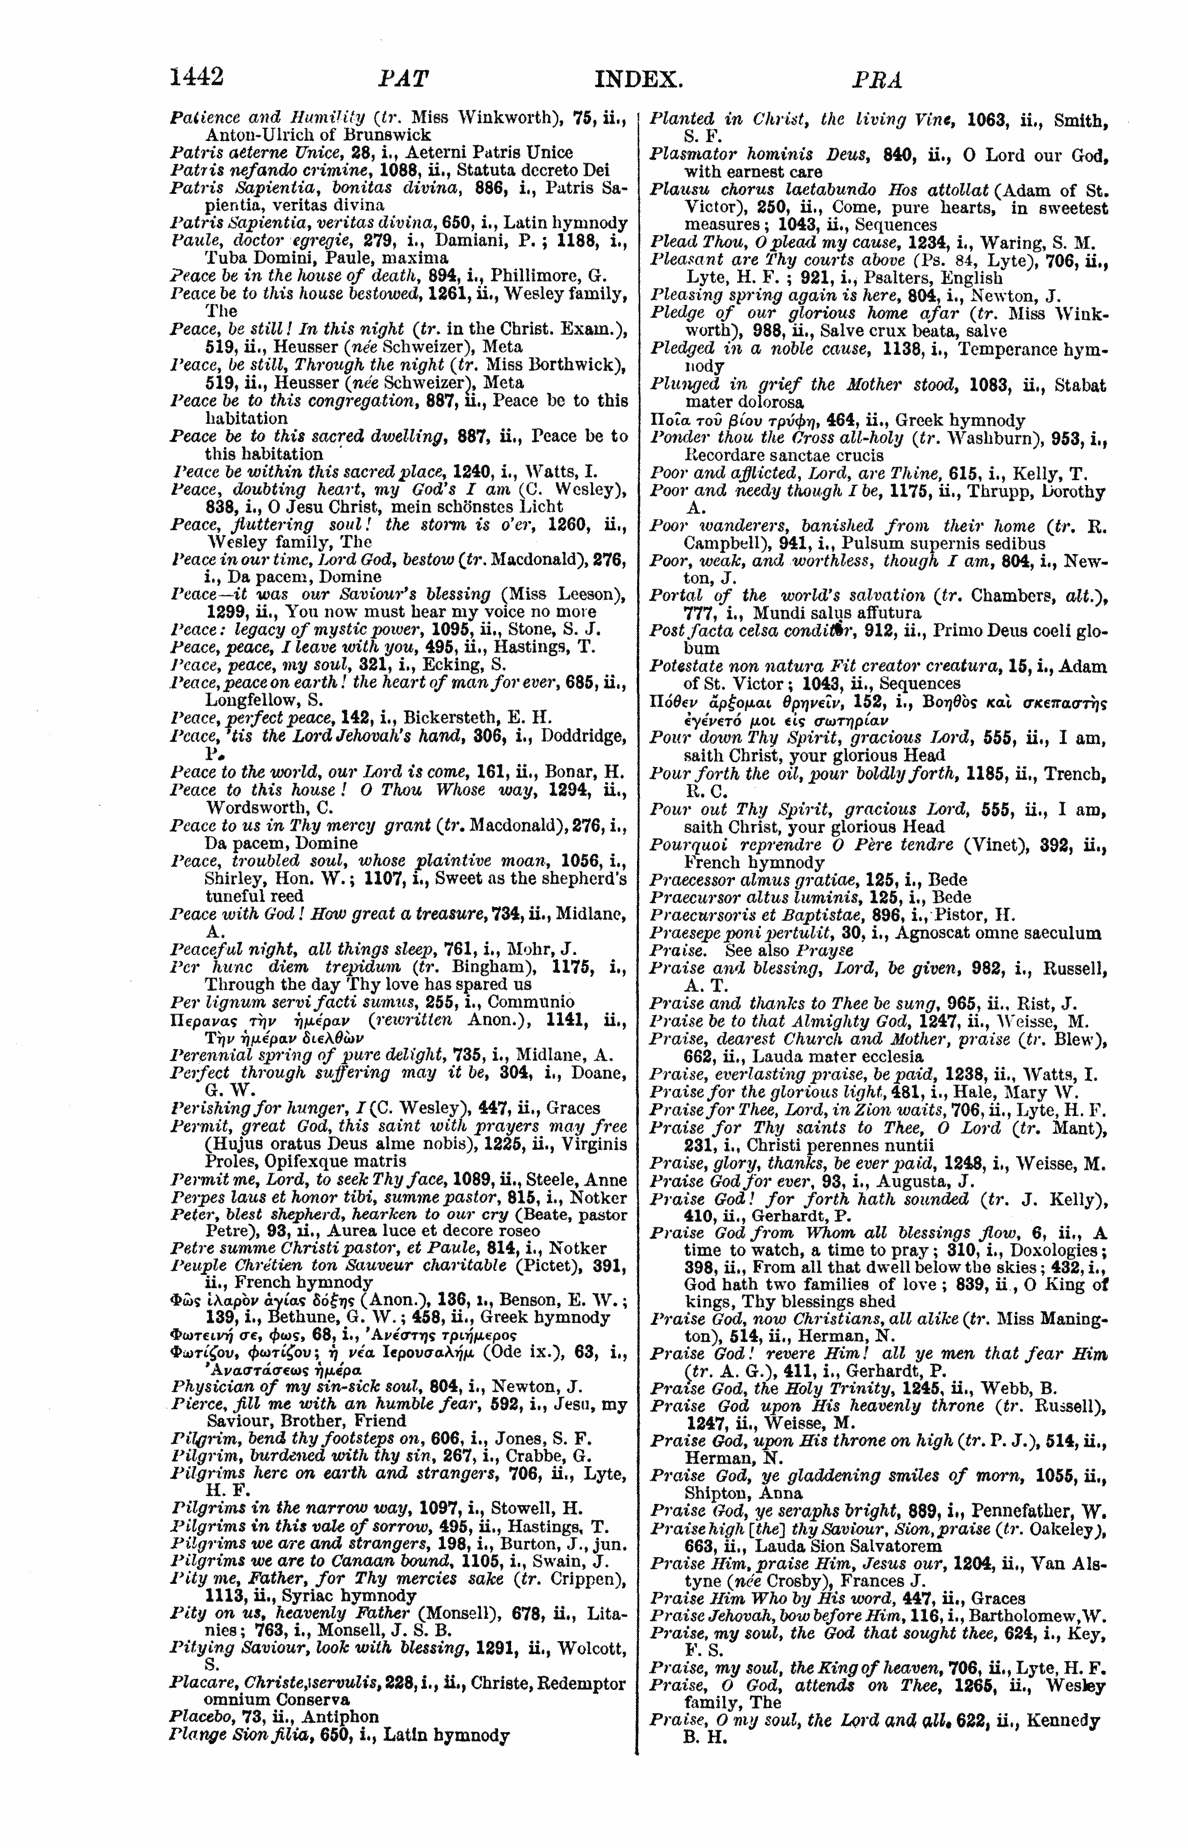 Image of page 1442